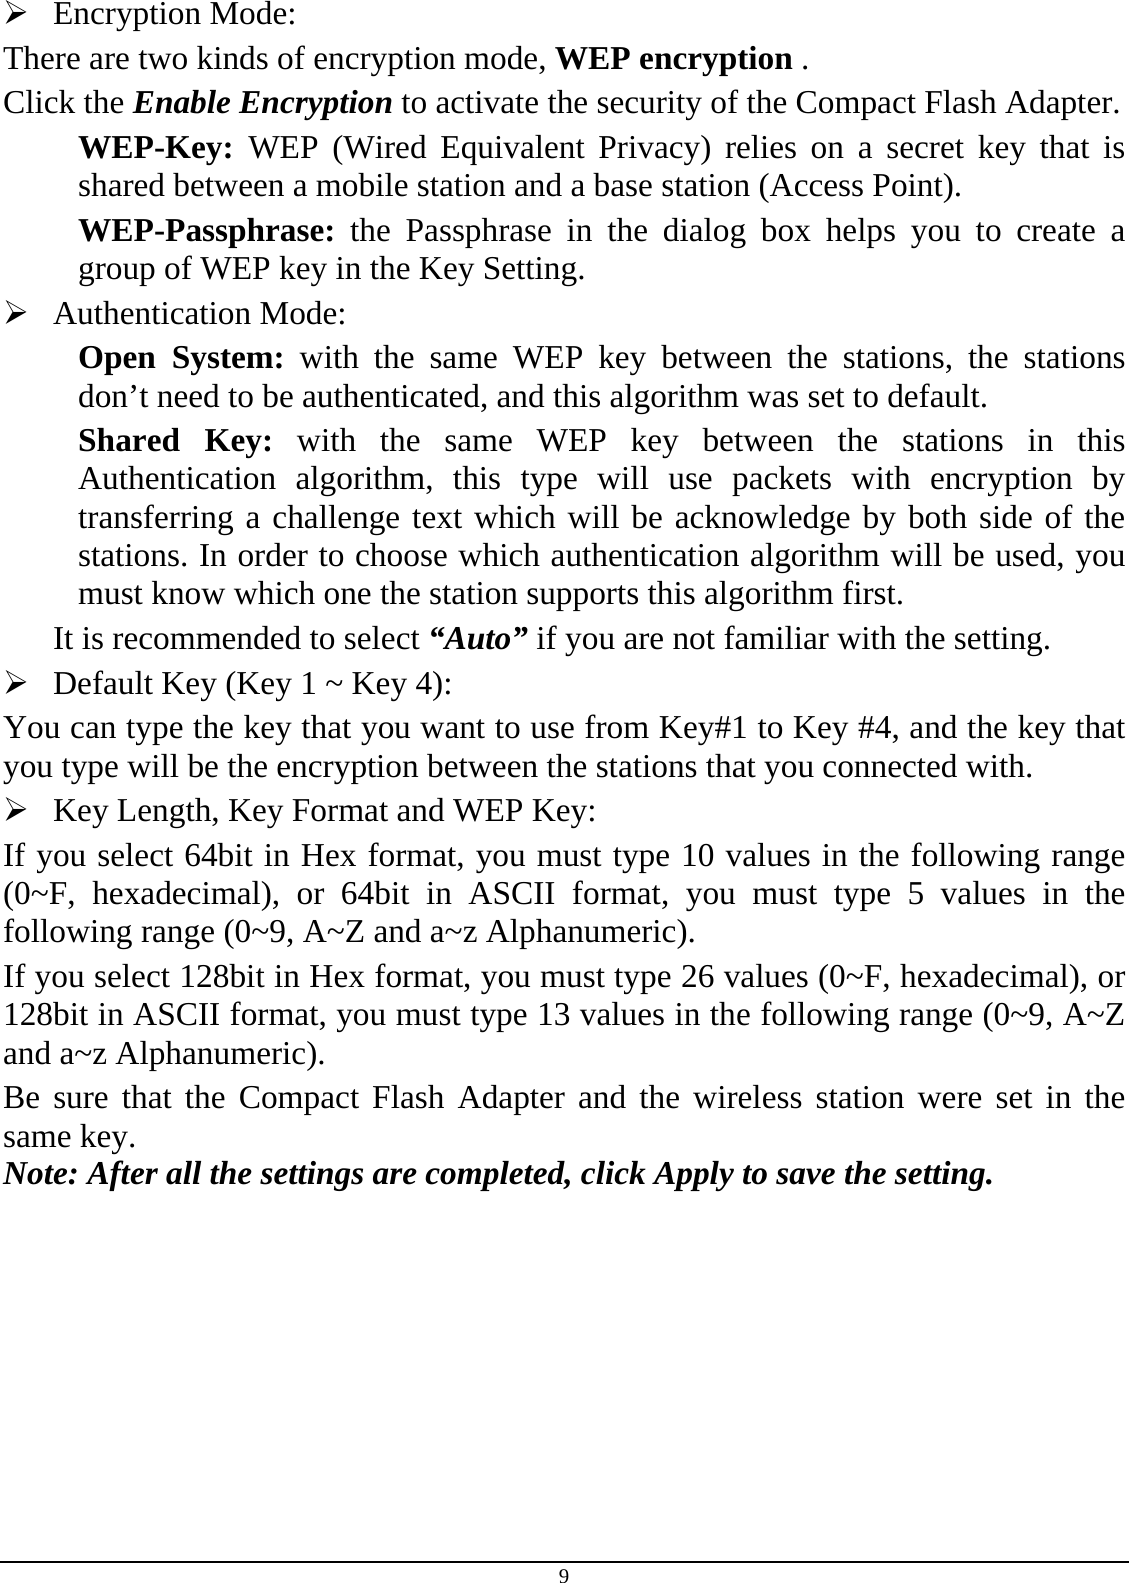 9 ¾ Encryption Mode:  There are two kinds of encryption mode, WEP encryption . Click the Enable Encryption to activate the security of the Compact Flash Adapter. WEP-Key:  WEP (Wired Equivalent Privacy) relies on a secret key that is shared between a mobile station and a base station (Access Point). WEP-Passphrase: the Passphrase in the dialog box helps you to create a group of WEP key in the Key Setting. ¾ Authentication Mode:  Open System: with the same WEP key between the stations, the stations don’t need to be authenticated, and this algorithm was set to default. Shared Key: with the same WEP key between the stations in this Authentication algorithm, this type will use packets with encryption by transferring a challenge text which will be acknowledge by both side of the stations. In order to choose which authentication algorithm will be used, you must know which one the station supports this algorithm first. It is recommended to select “Auto” if you are not familiar with the setting. ¾ Default Key (Key 1 ~ Key 4):  You can type the key that you want to use from Key#1 to Key #4, and the key that you type will be the encryption between the stations that you connected with.  ¾ Key Length, Key Format and WEP Key: If you select 64bit in Hex format, you must type 10 values in the following range (0~F, hexadecimal), or 64bit in ASCII format, you must type 5 values in the following range (0~9, A~Z and a~z Alphanumeric).  If you select 128bit in Hex format, you must type 26 values (0~F, hexadecimal), or 128bit in ASCII format, you must type 13 values in the following range (0~9, A~Z and a~z Alphanumeric). Be sure that the Compact Flash Adapter and the wireless station were set in the same key. Note: After all the settings are completed, click Apply to save the setting. 